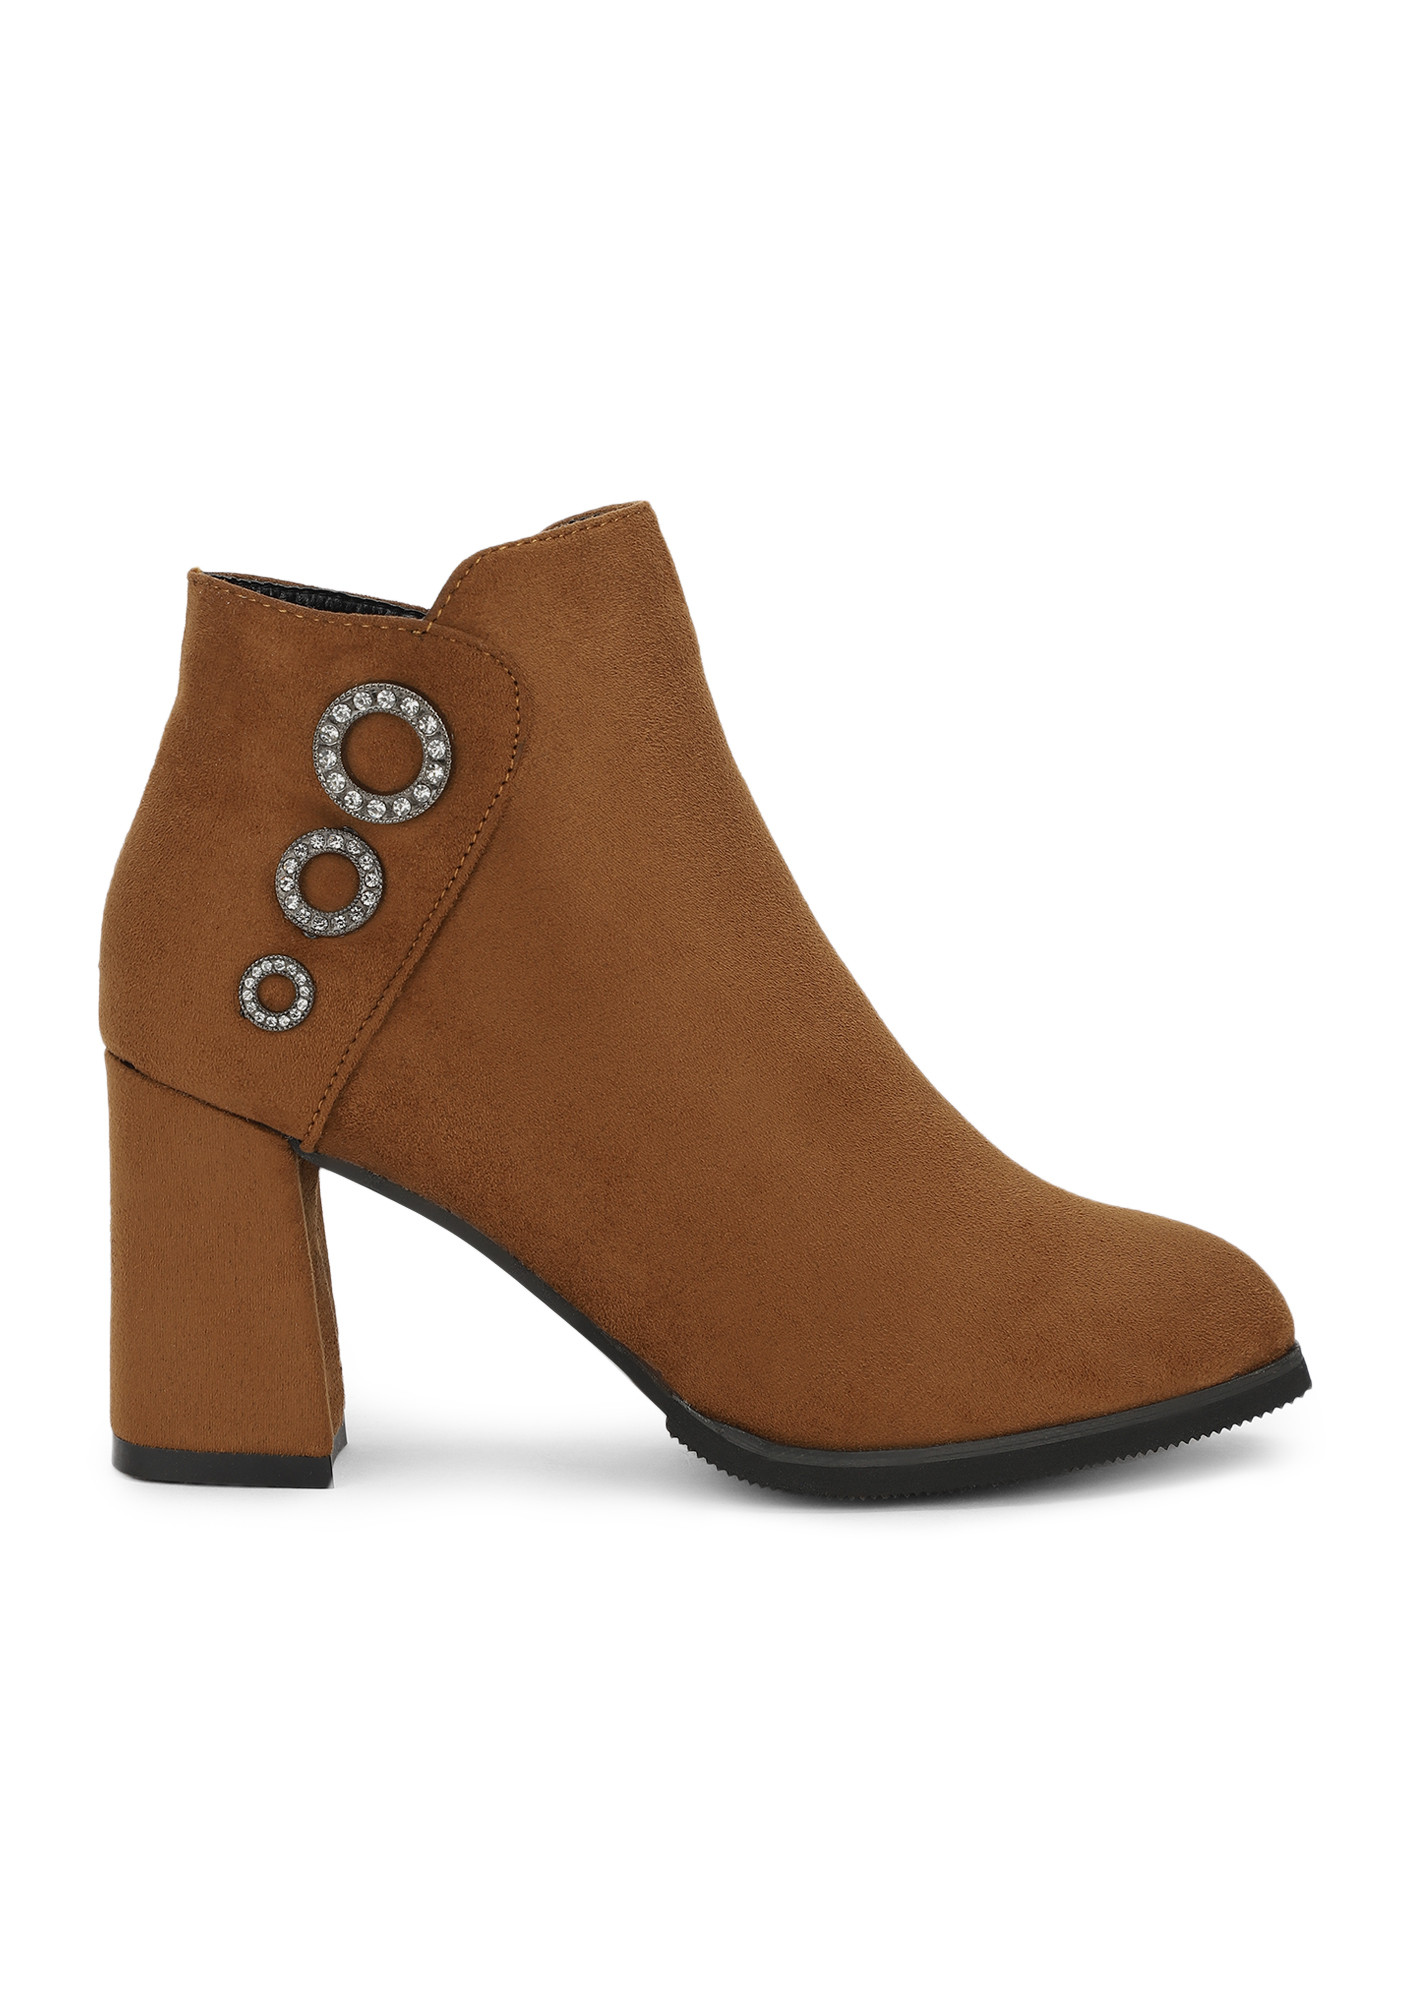 TAKE ME TO WONDERLAND TAN ANKLE BOOTS